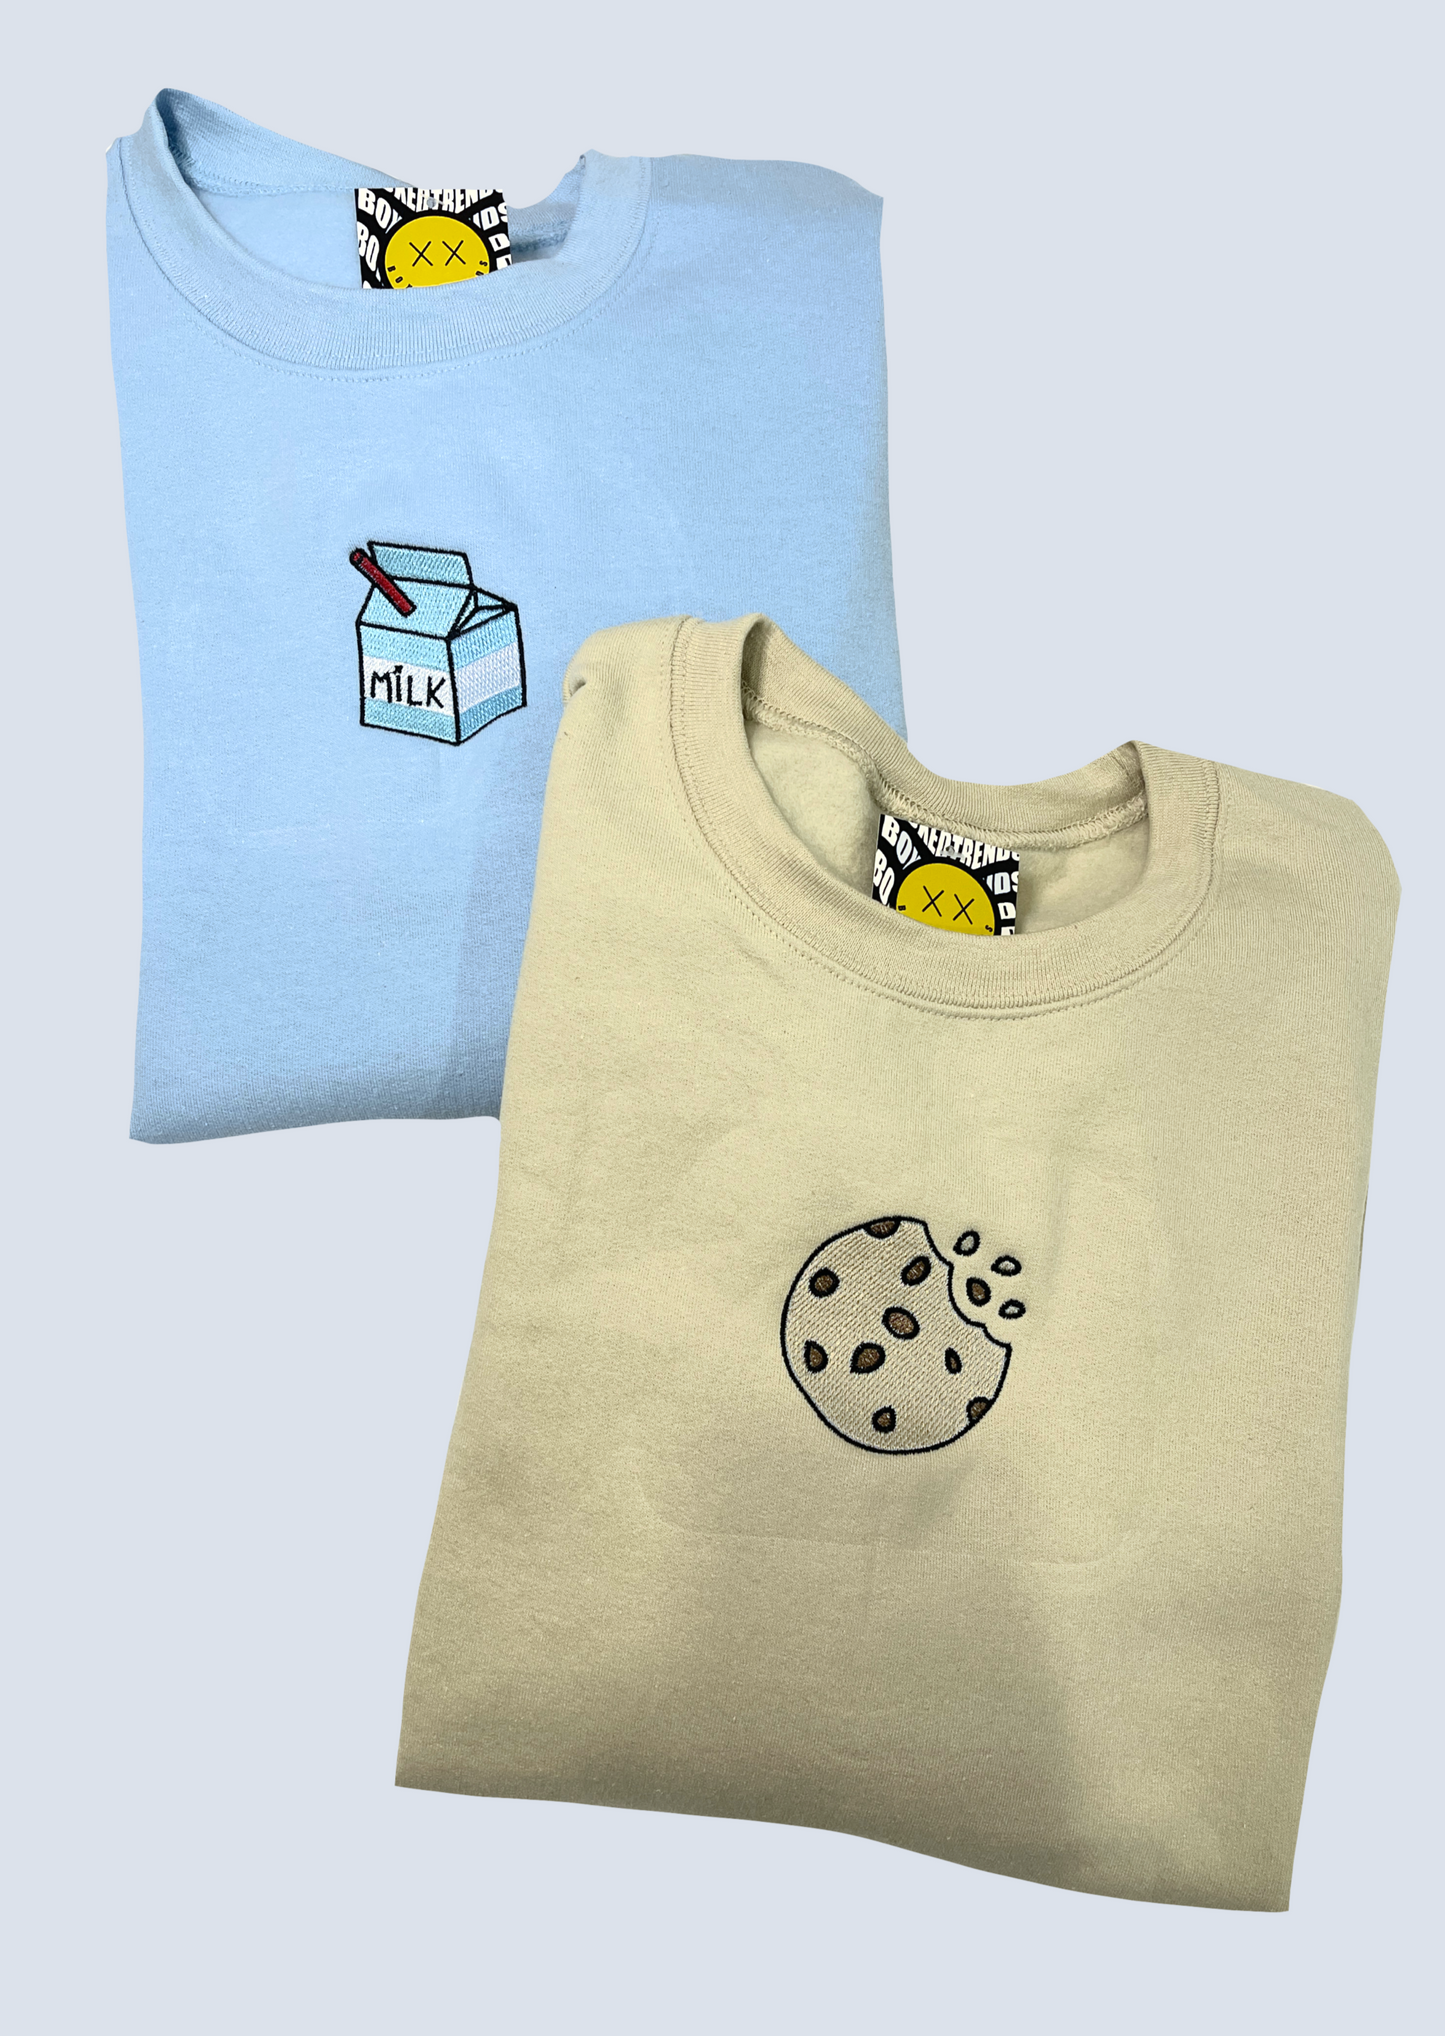 Milk and Cookies Embroidered Matching Set